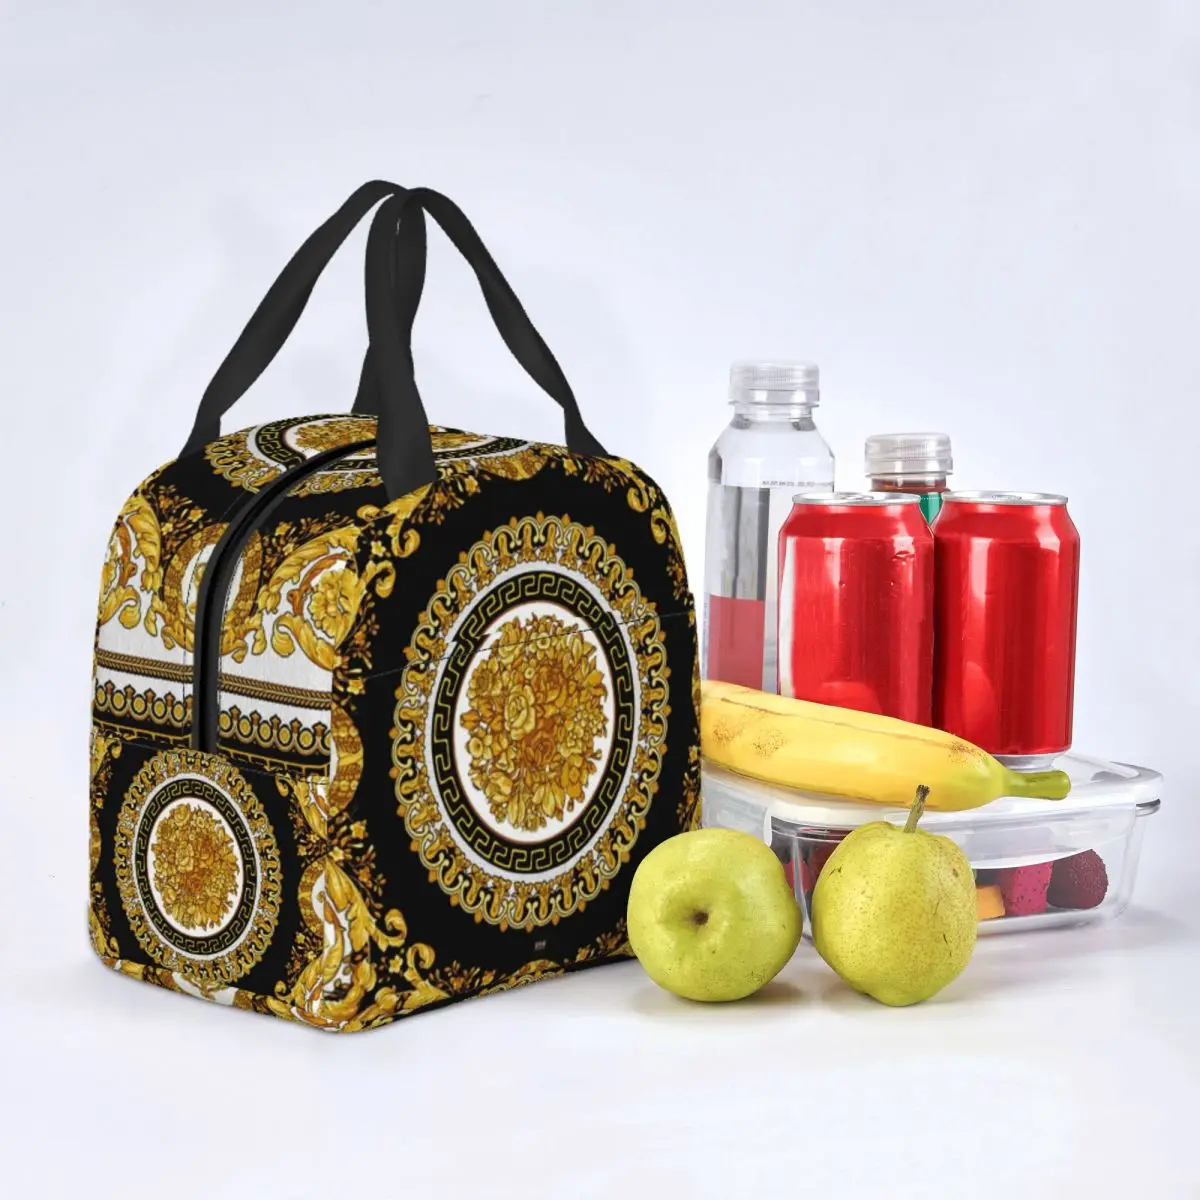 Decorative Golden Medallion Baroque Lunch Bags Waterproof Insulated Cooler Thermal Cold Food Picnic Lunch Box for Women Kids